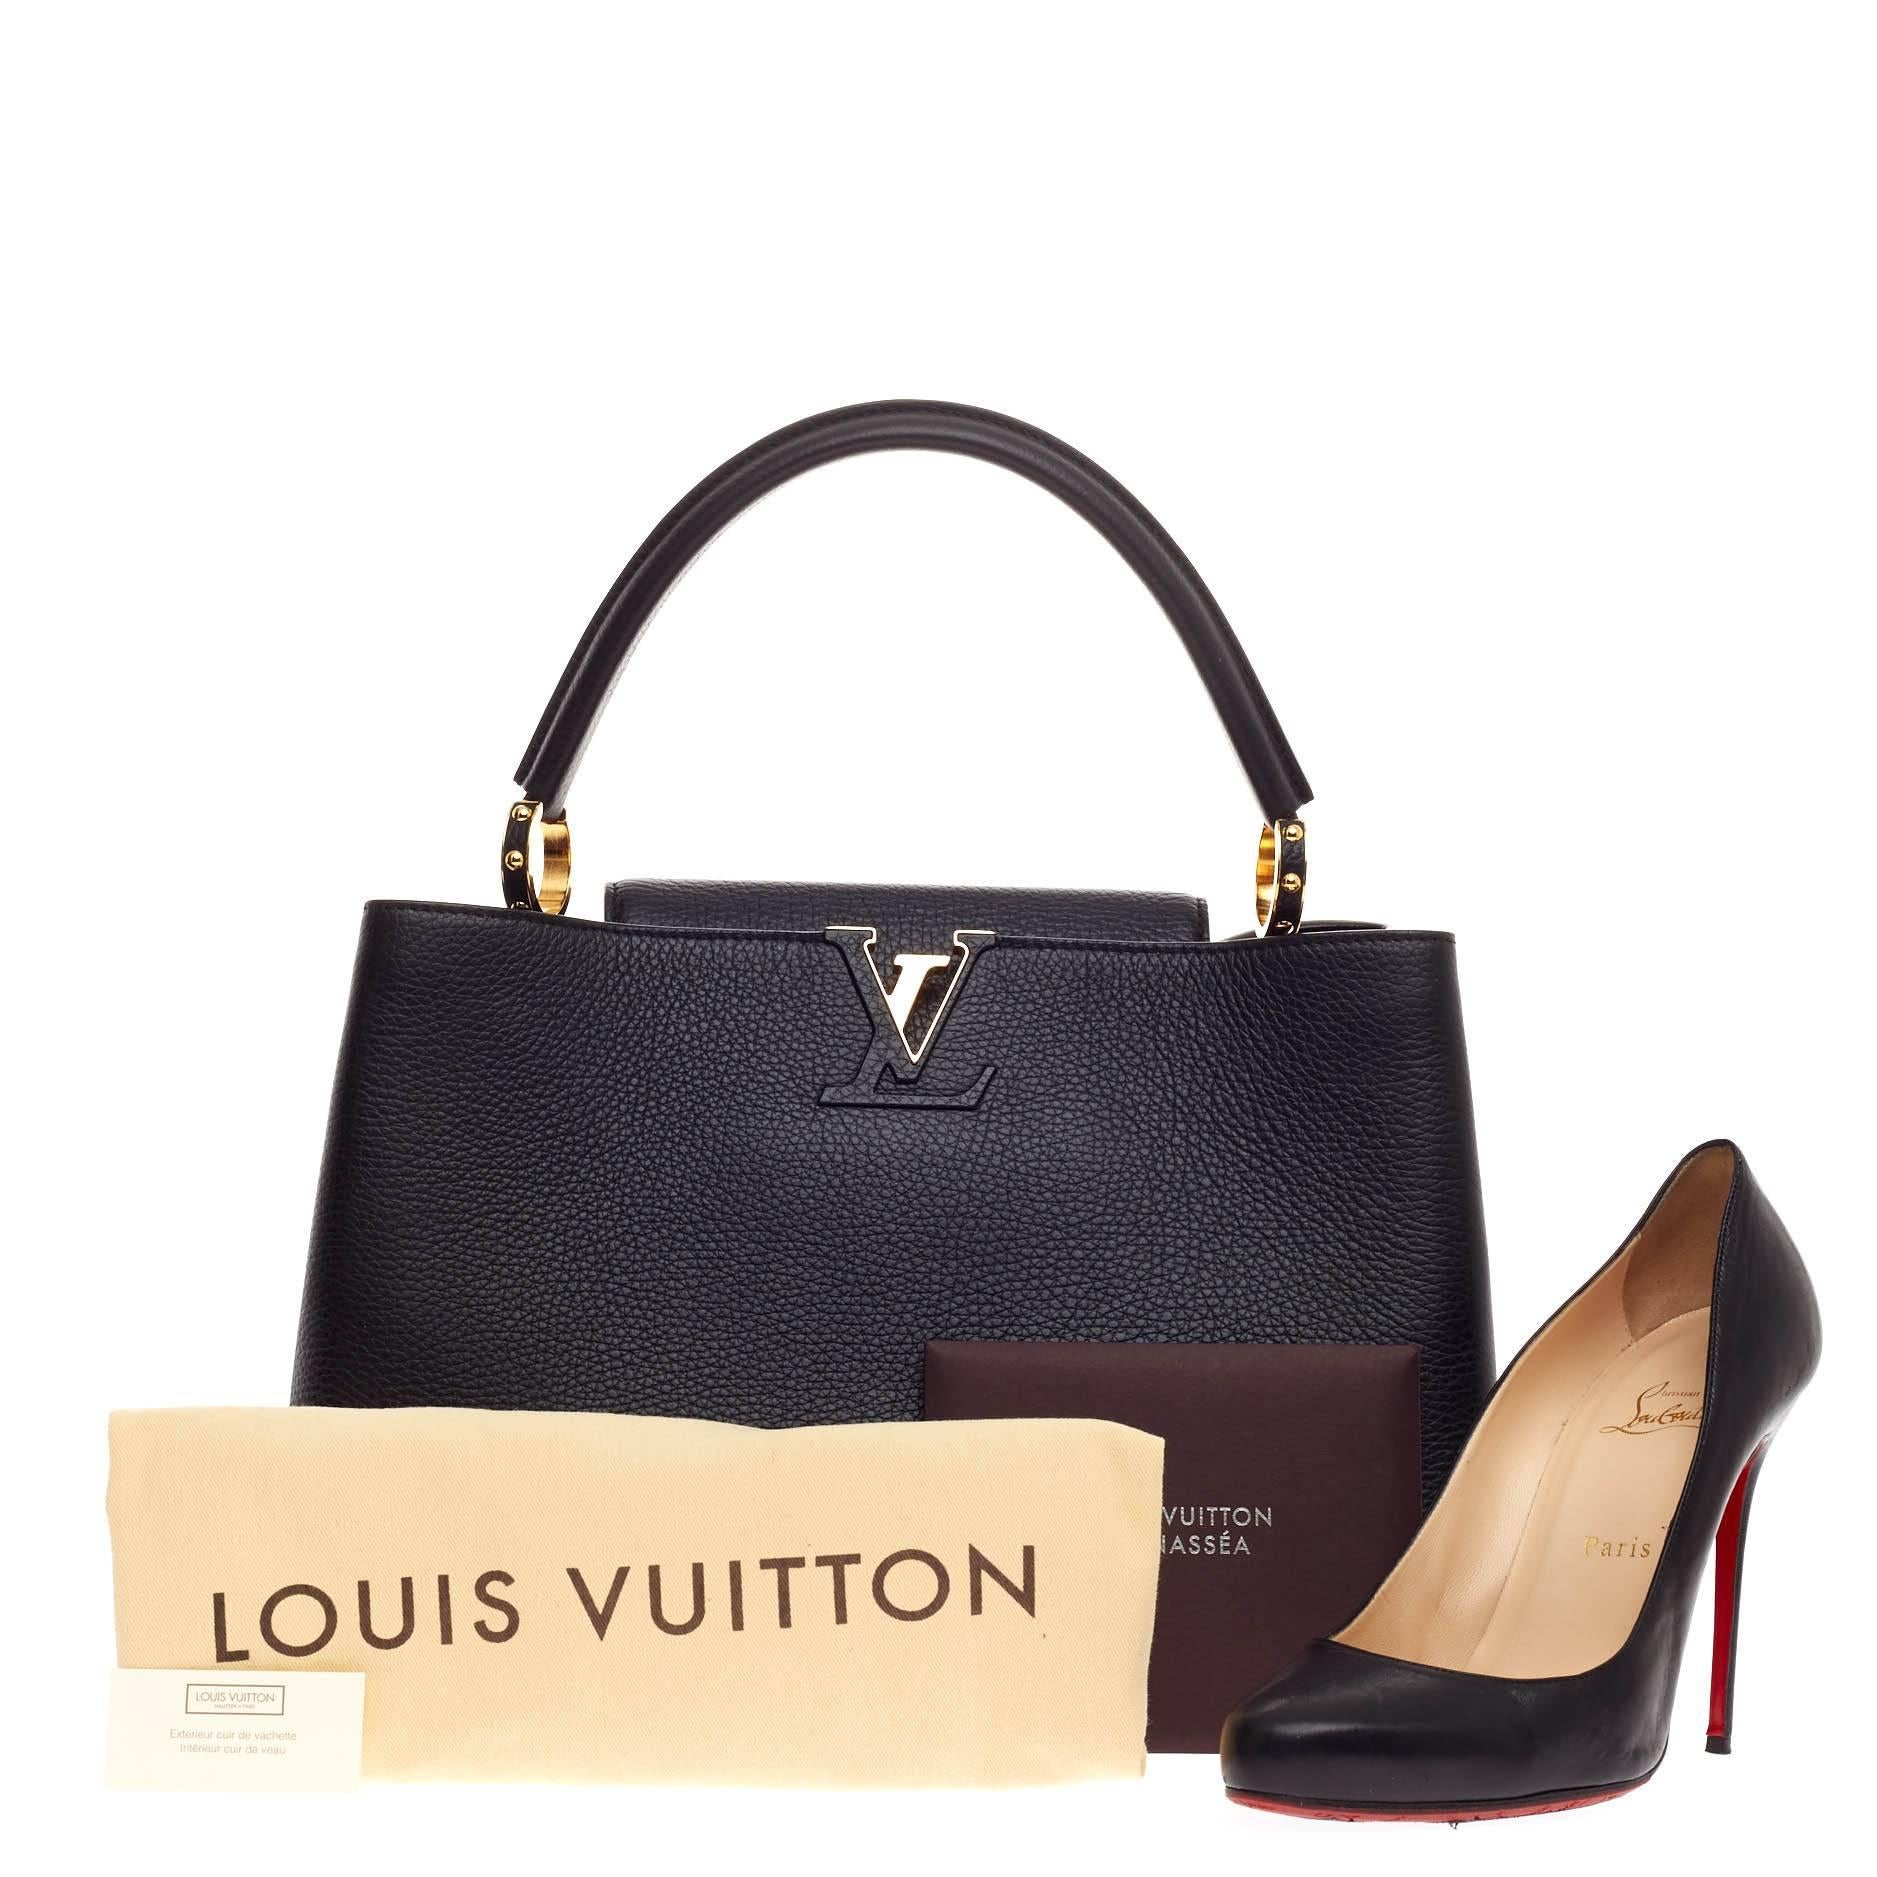 This authentic Louis Vuitton Capucines Leather MM is sophisticated and ladylike luxurious bag from the brand's Fall 2013 Collection inspired by its Parisian heritage. Crafted in nior black taurillon leather, this chic, stand-out bag features a